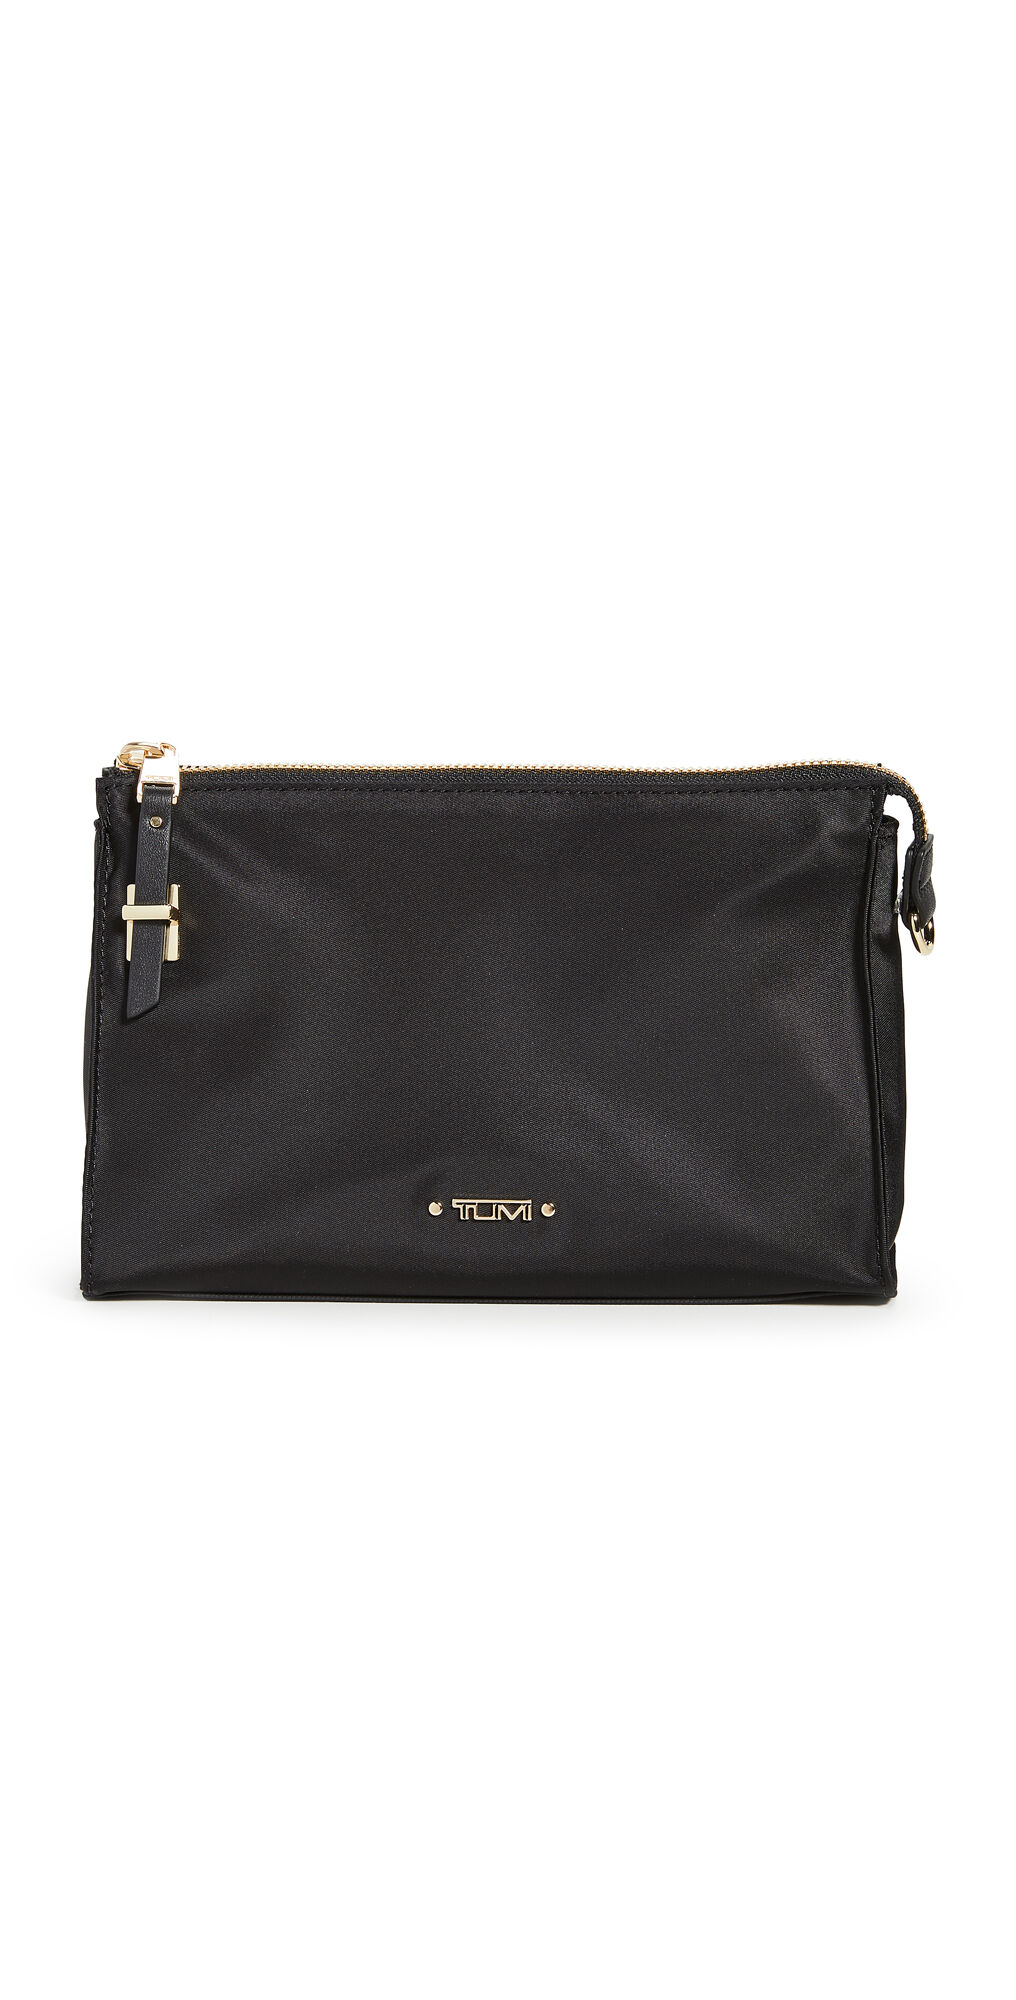 Tumi Basel Small Pouch Black One Size  Black  size:One Size